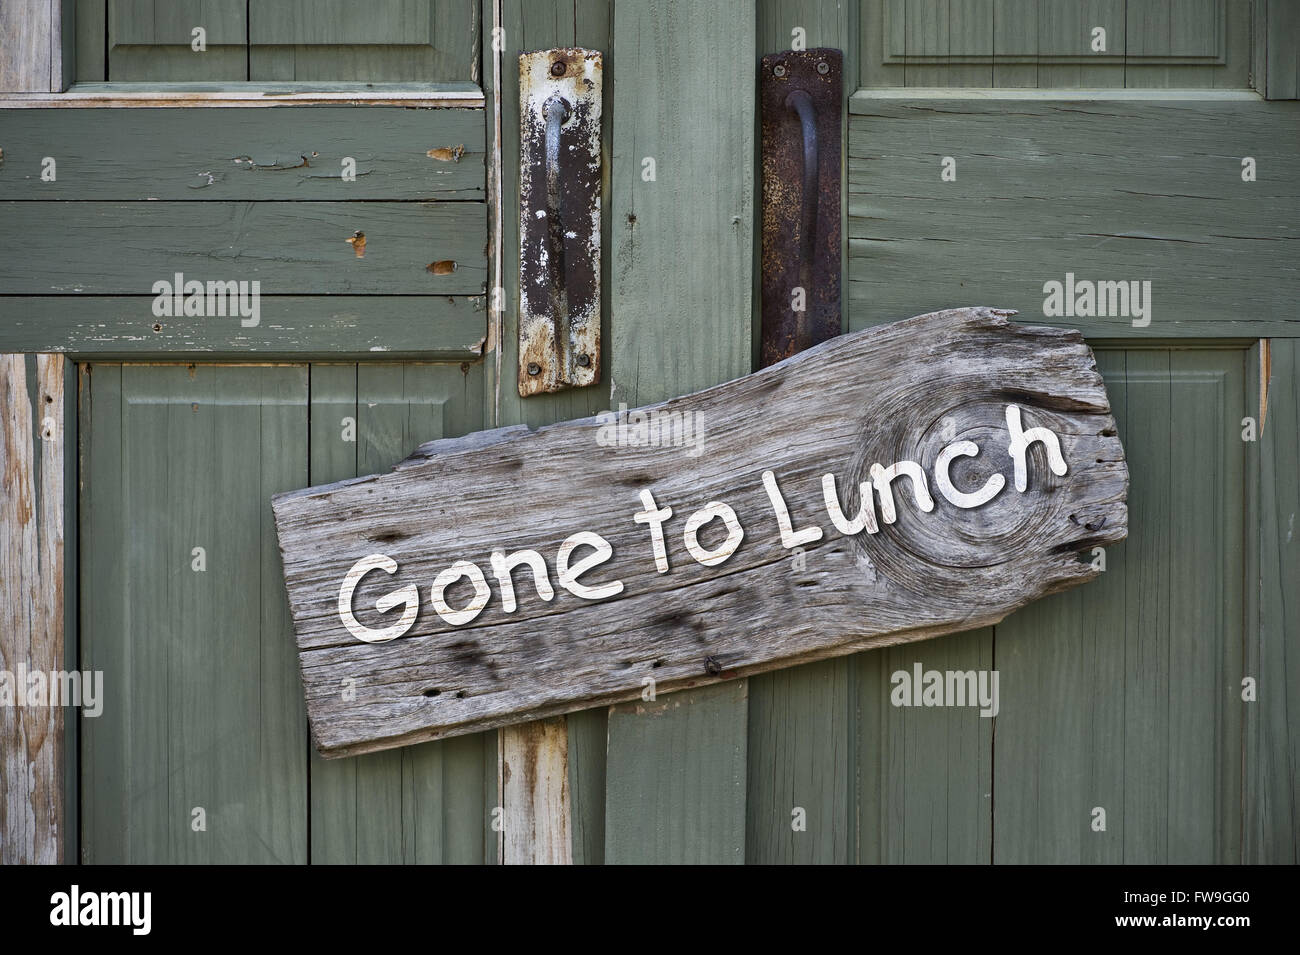 Gone to lunch sign on old green doors. Stock Photo